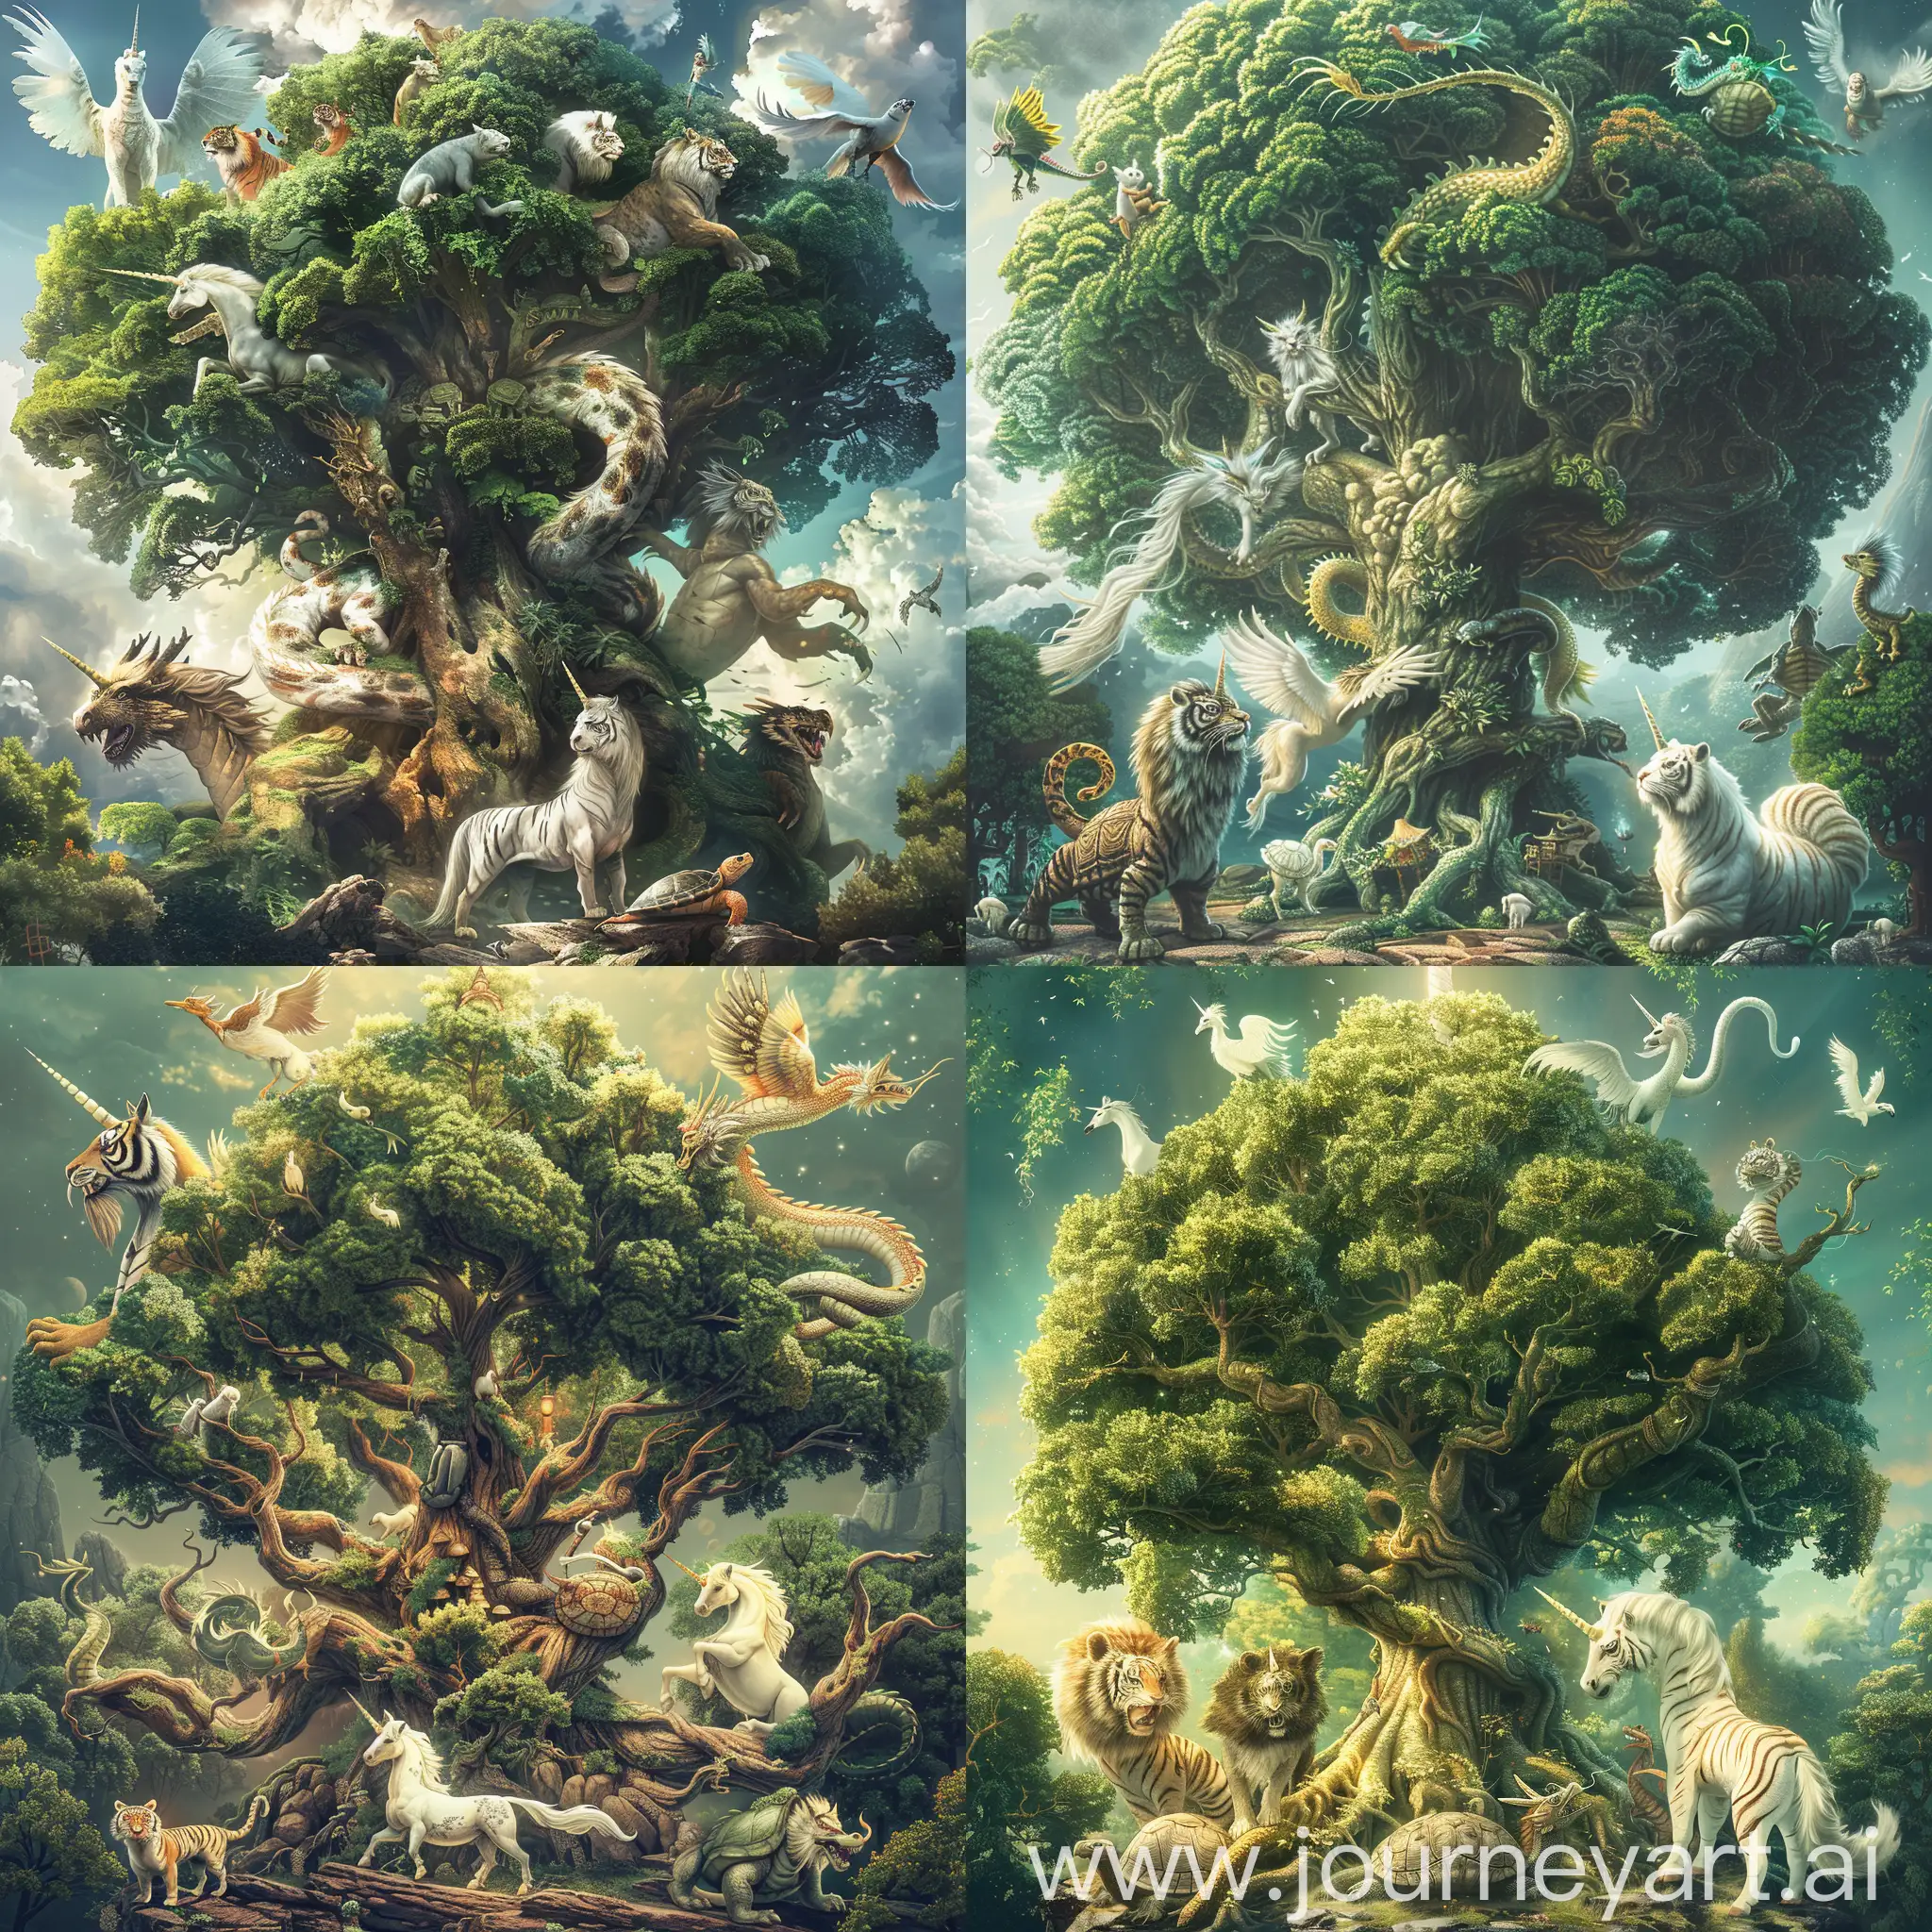 Draw a towering tree with vitality. In the picture, there are Kunpeng, unicorn, Phoenix, turtle, dragon, and white tiger around the tree. The size of the beast is large, with 8k picture quality and super details